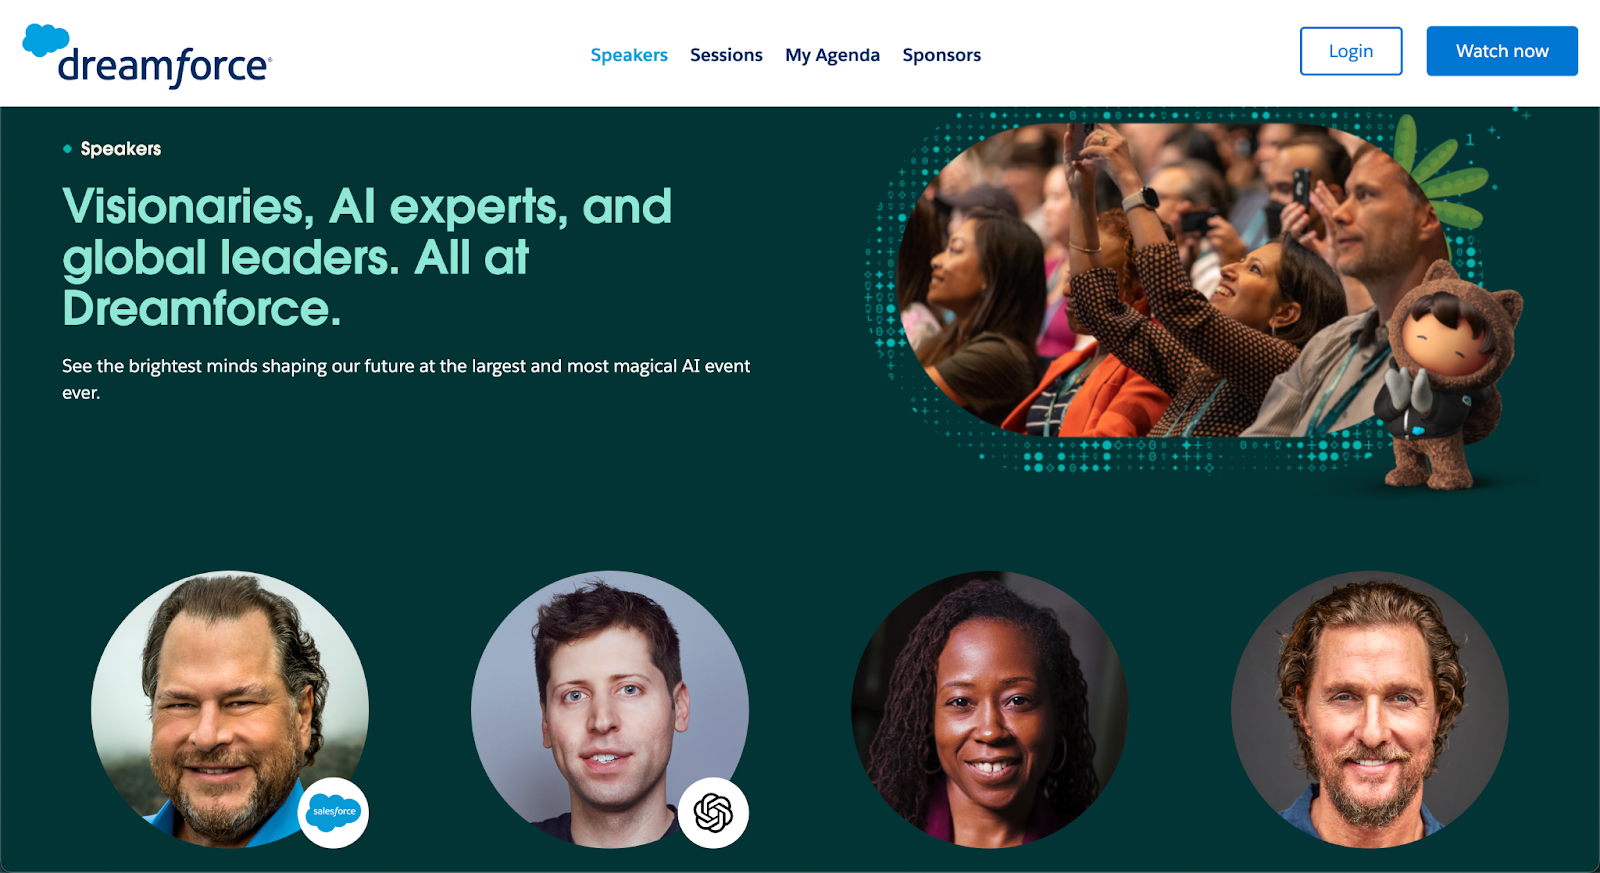 event website examples, dreamforce